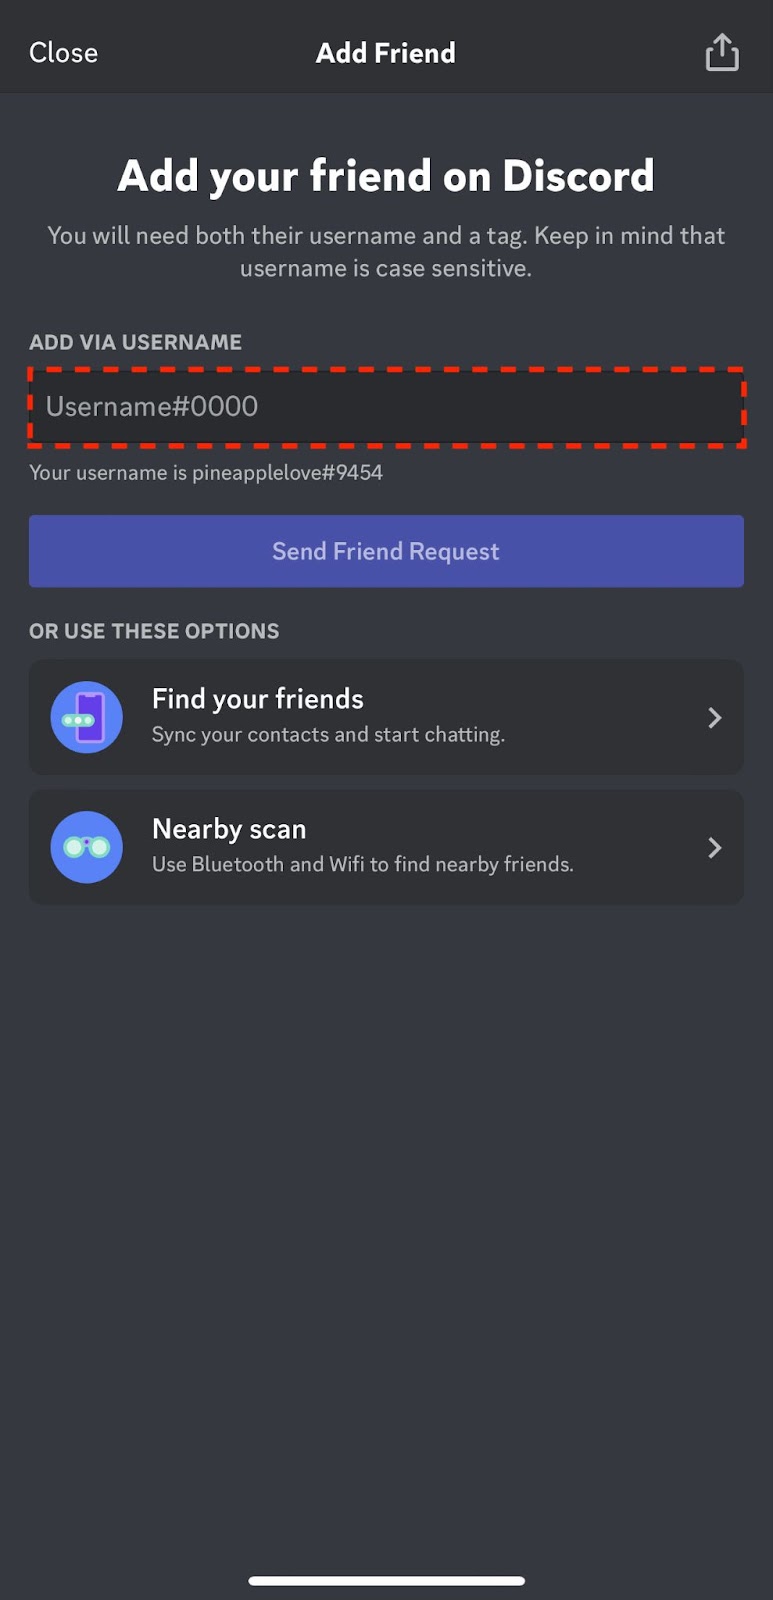 How to Add Friends on Discord